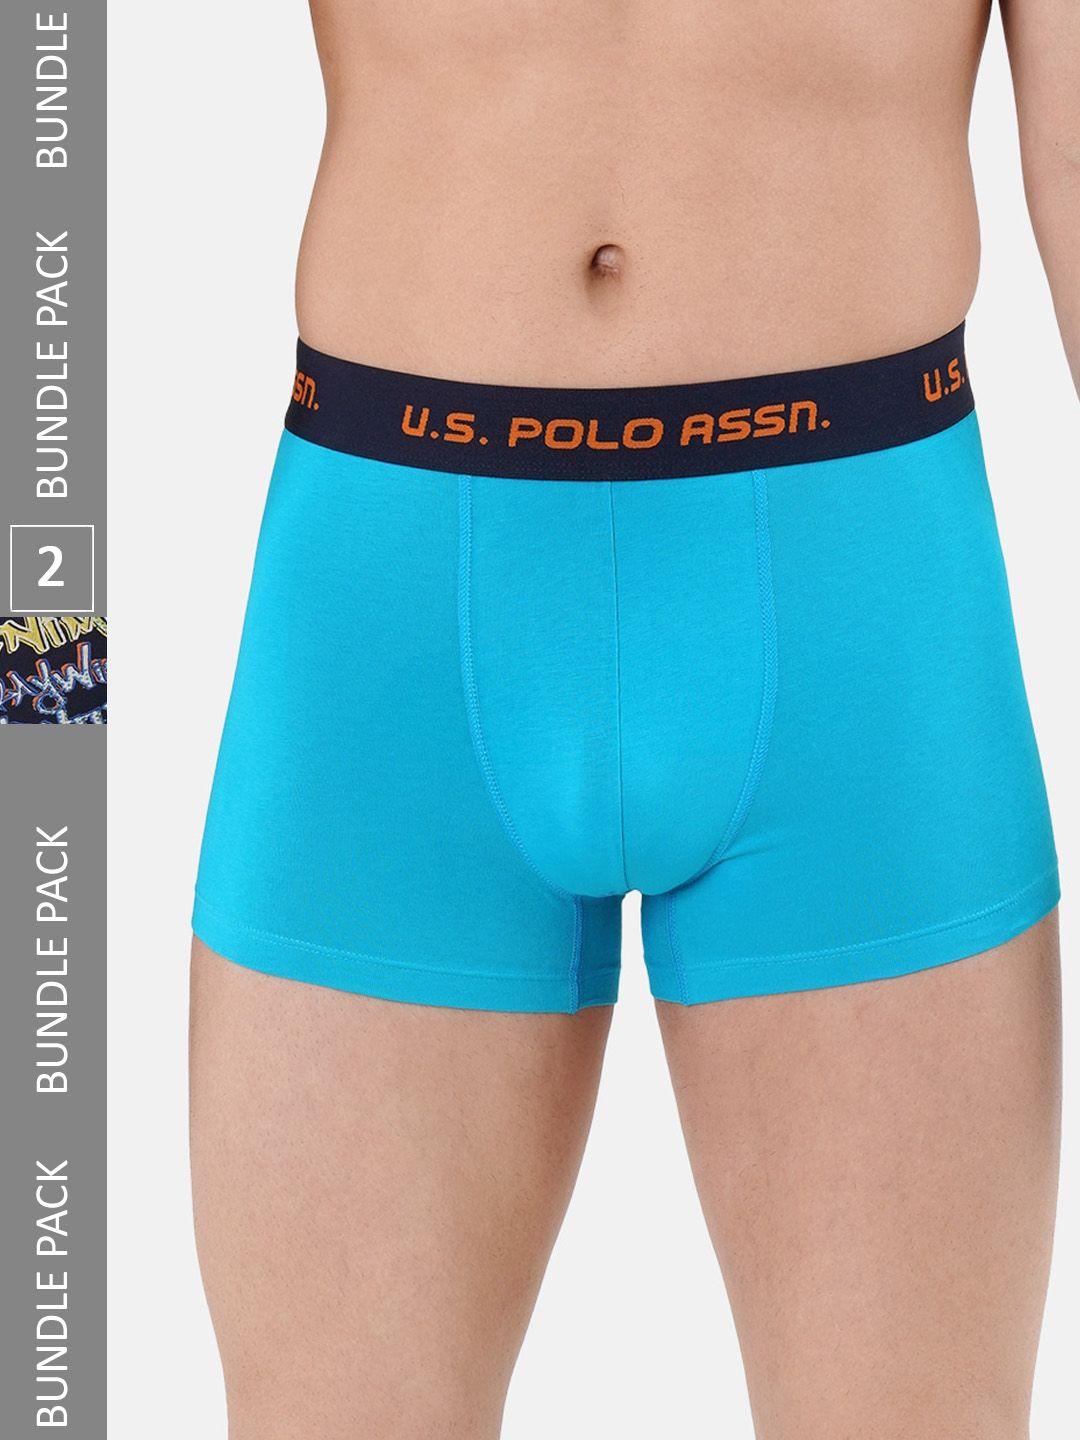 u.s.-polo-assn.-pack-of-2-cotton-stretch-trunks